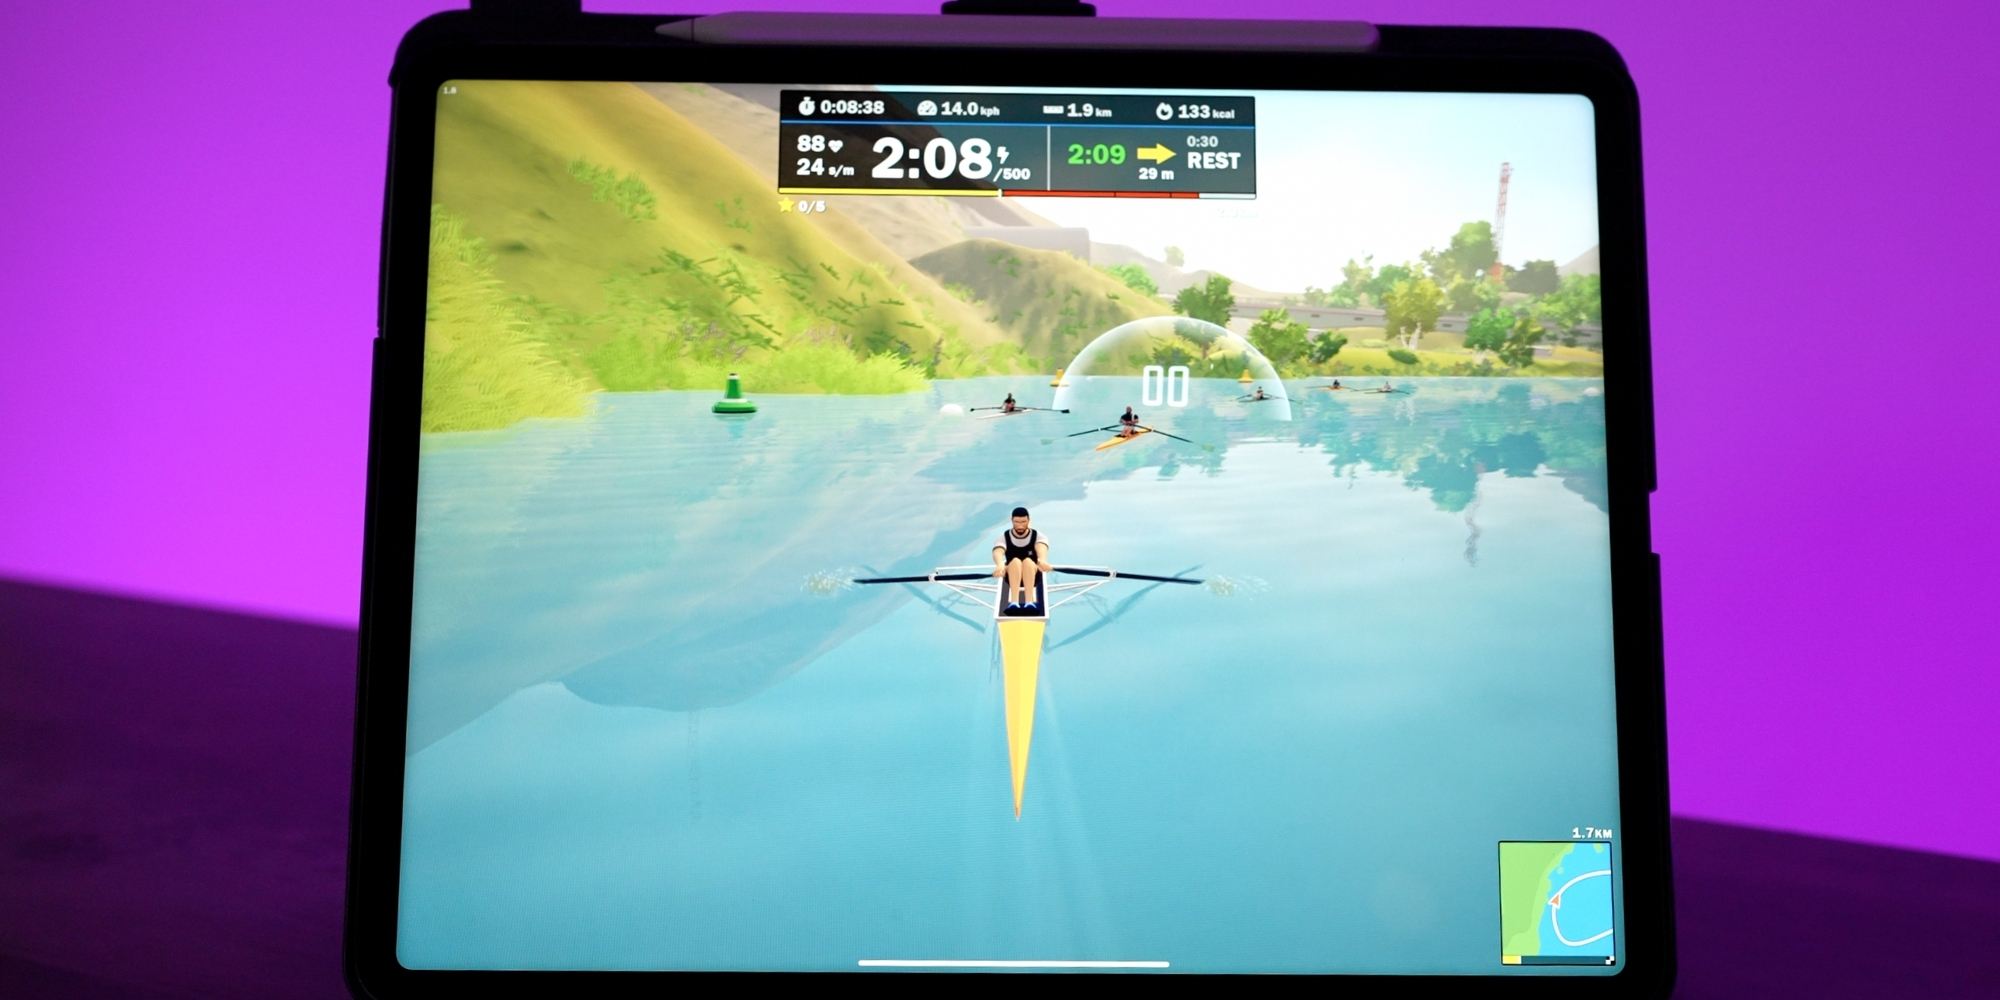 A "Zwift Rowers": Rowing App, now also available on Apple TV